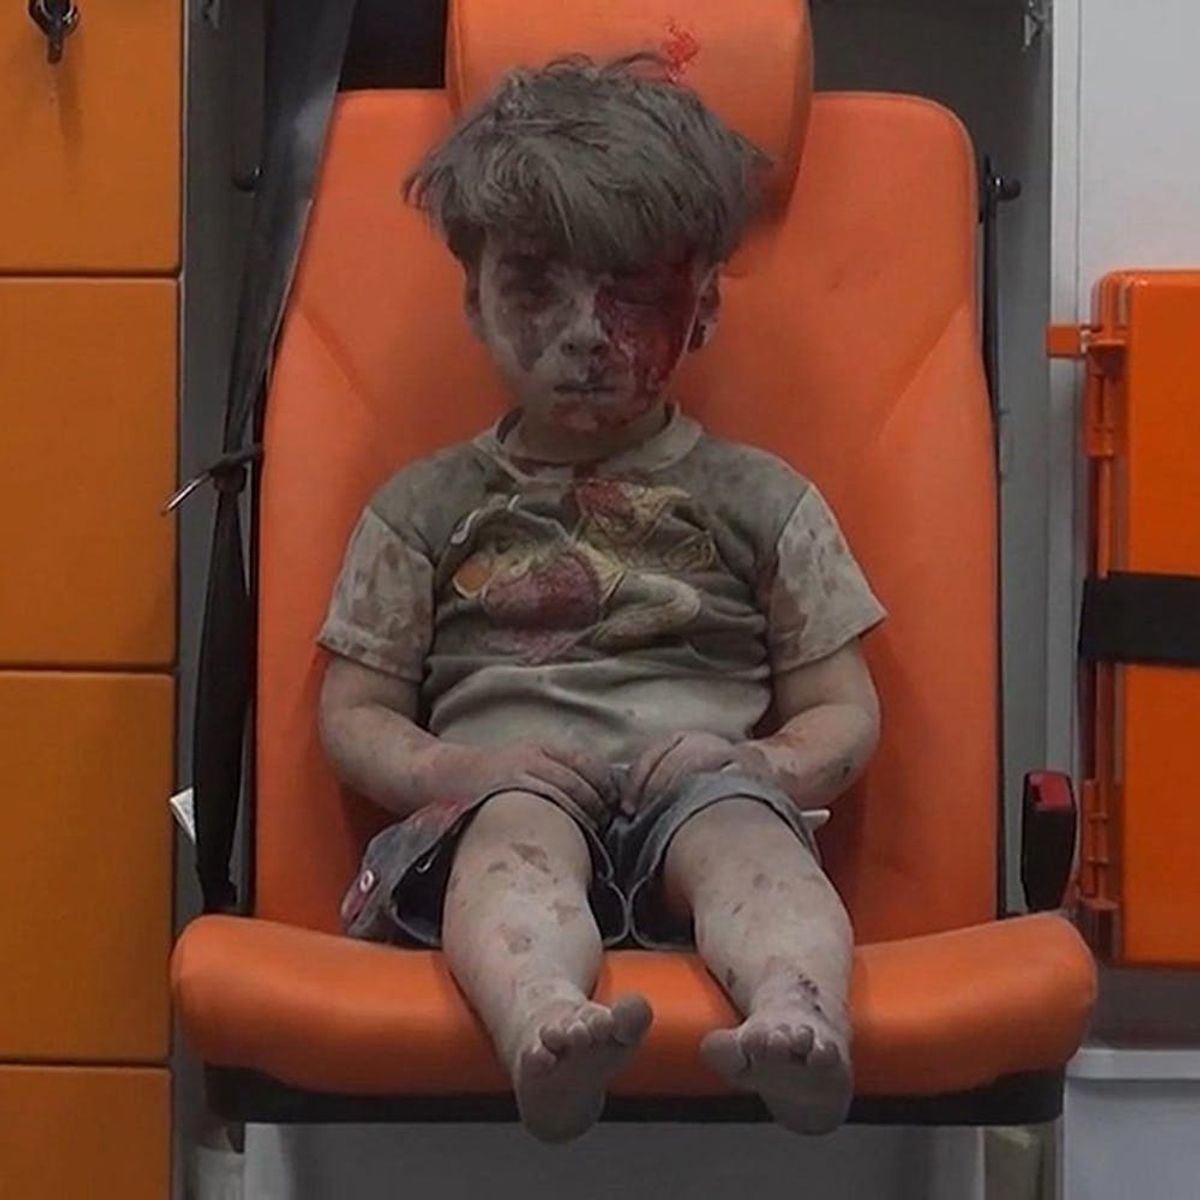 Here’s Everything We Know About the Syrian Child Pulled From Aleppo